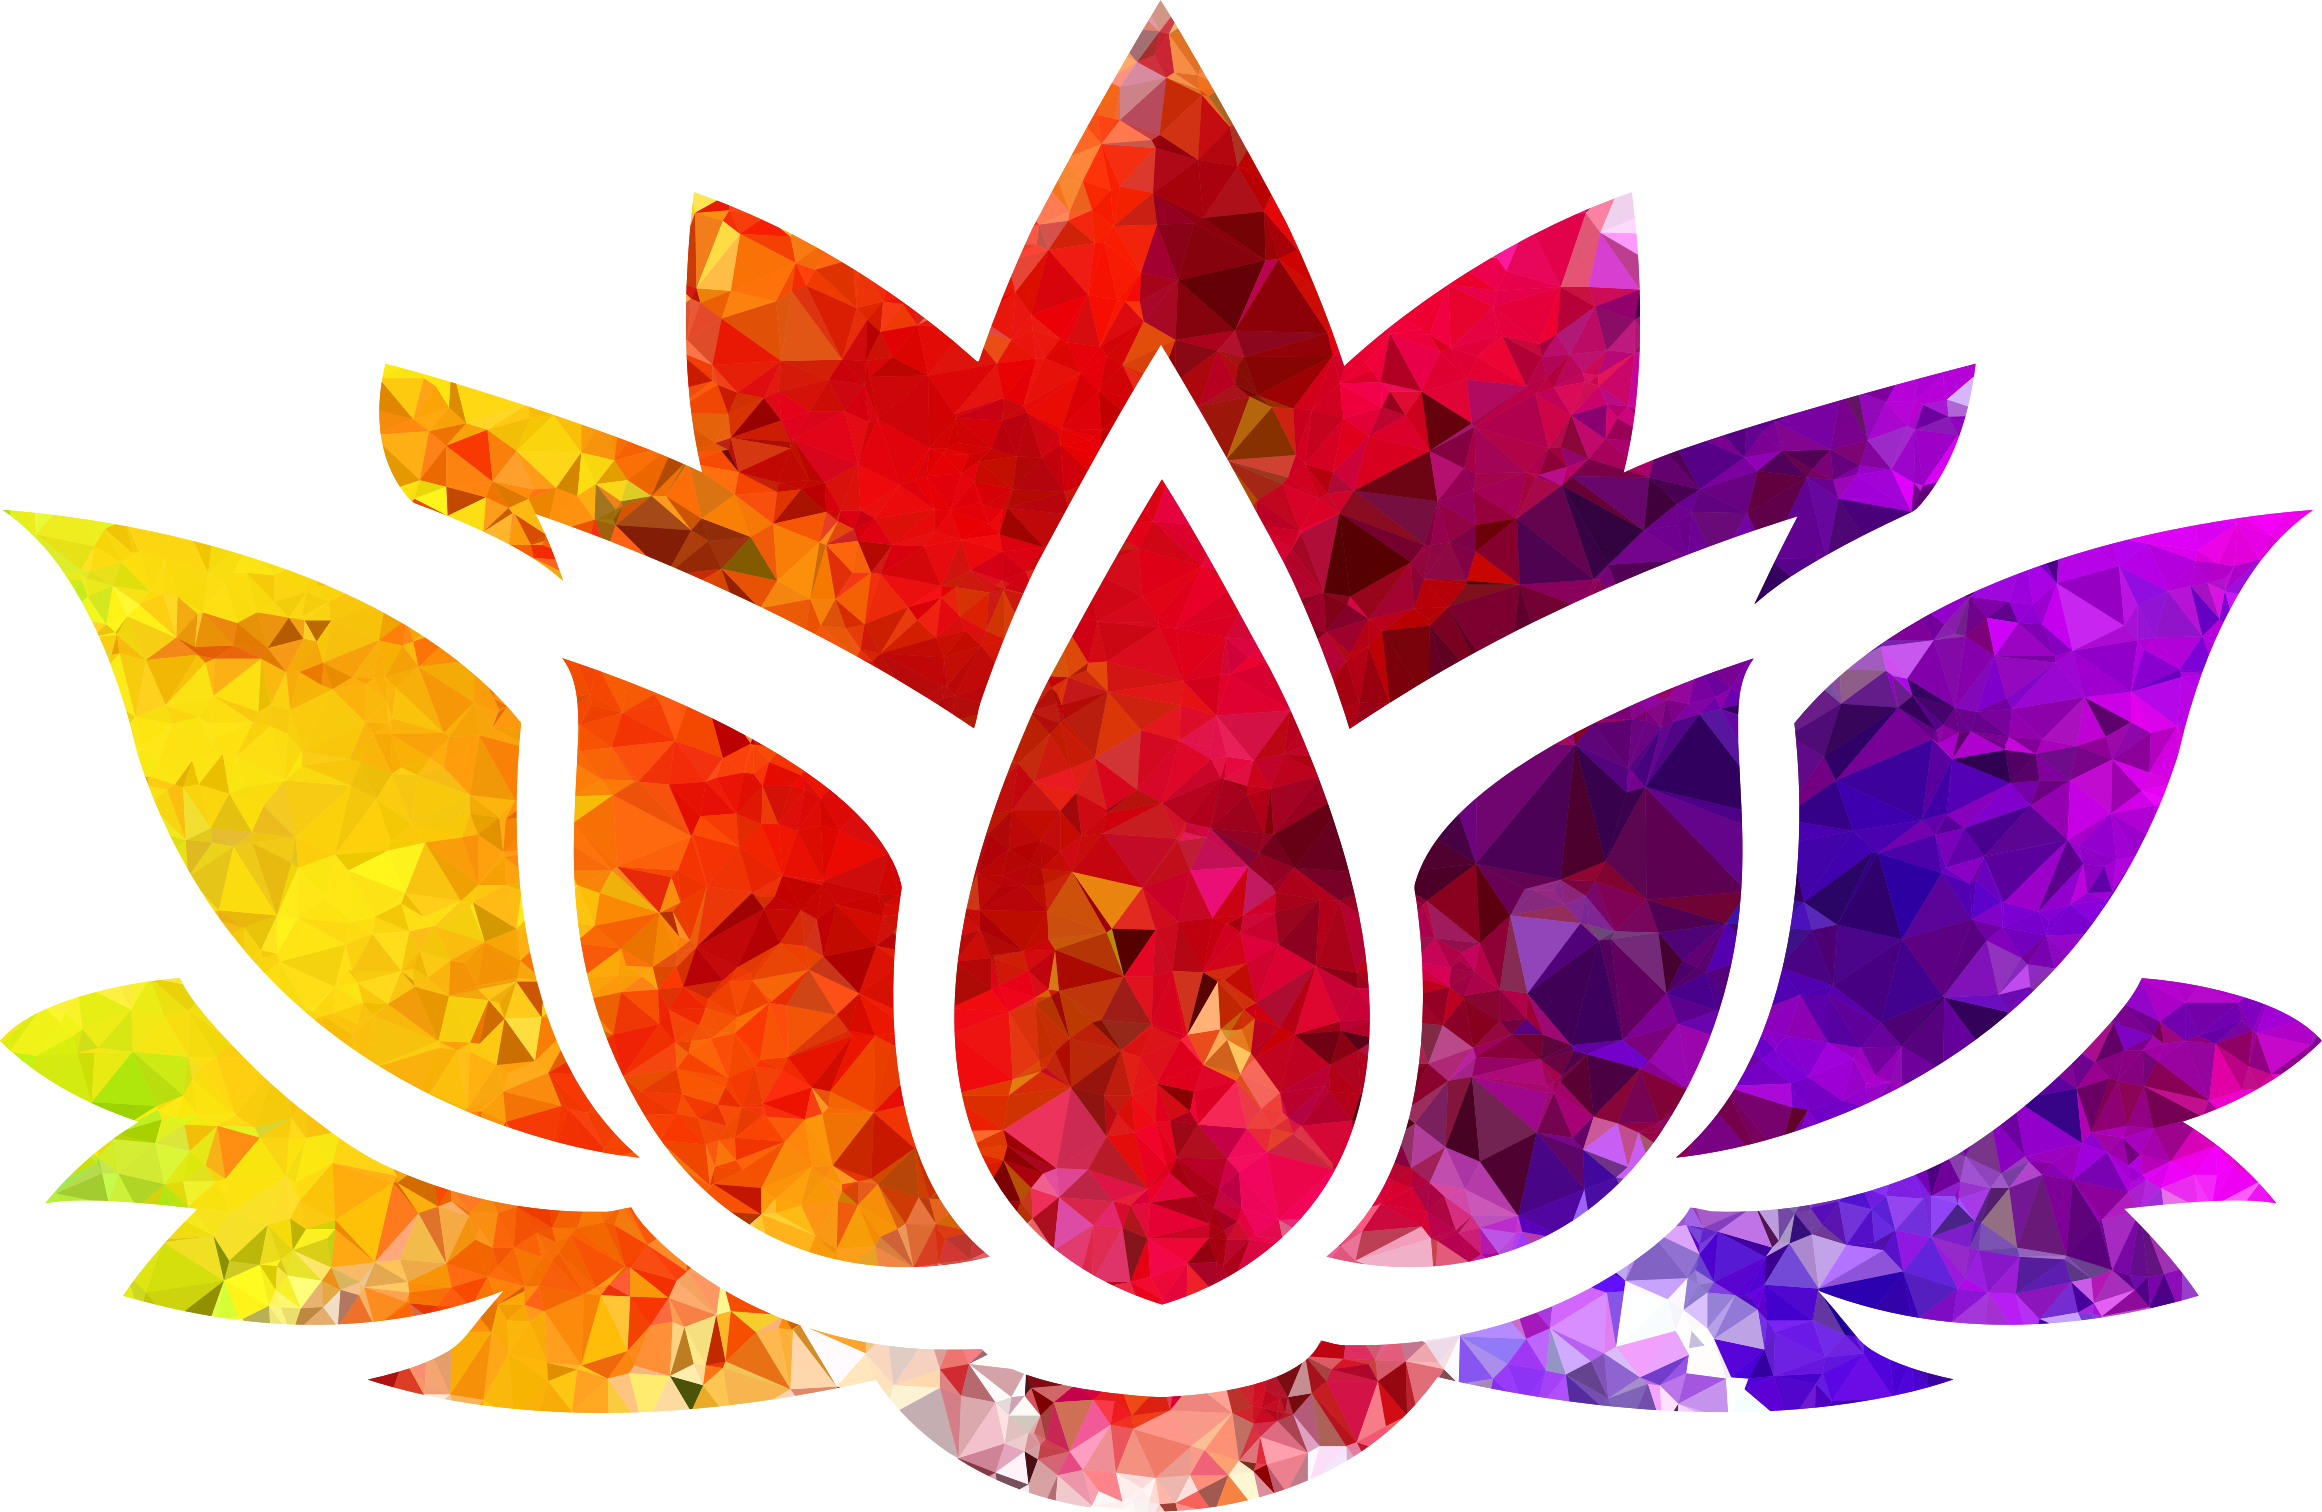 This Free Icons Png Design Of Topaz Ruby Sapphire Lotus - Lotus Flower Design Png (2322x1512)